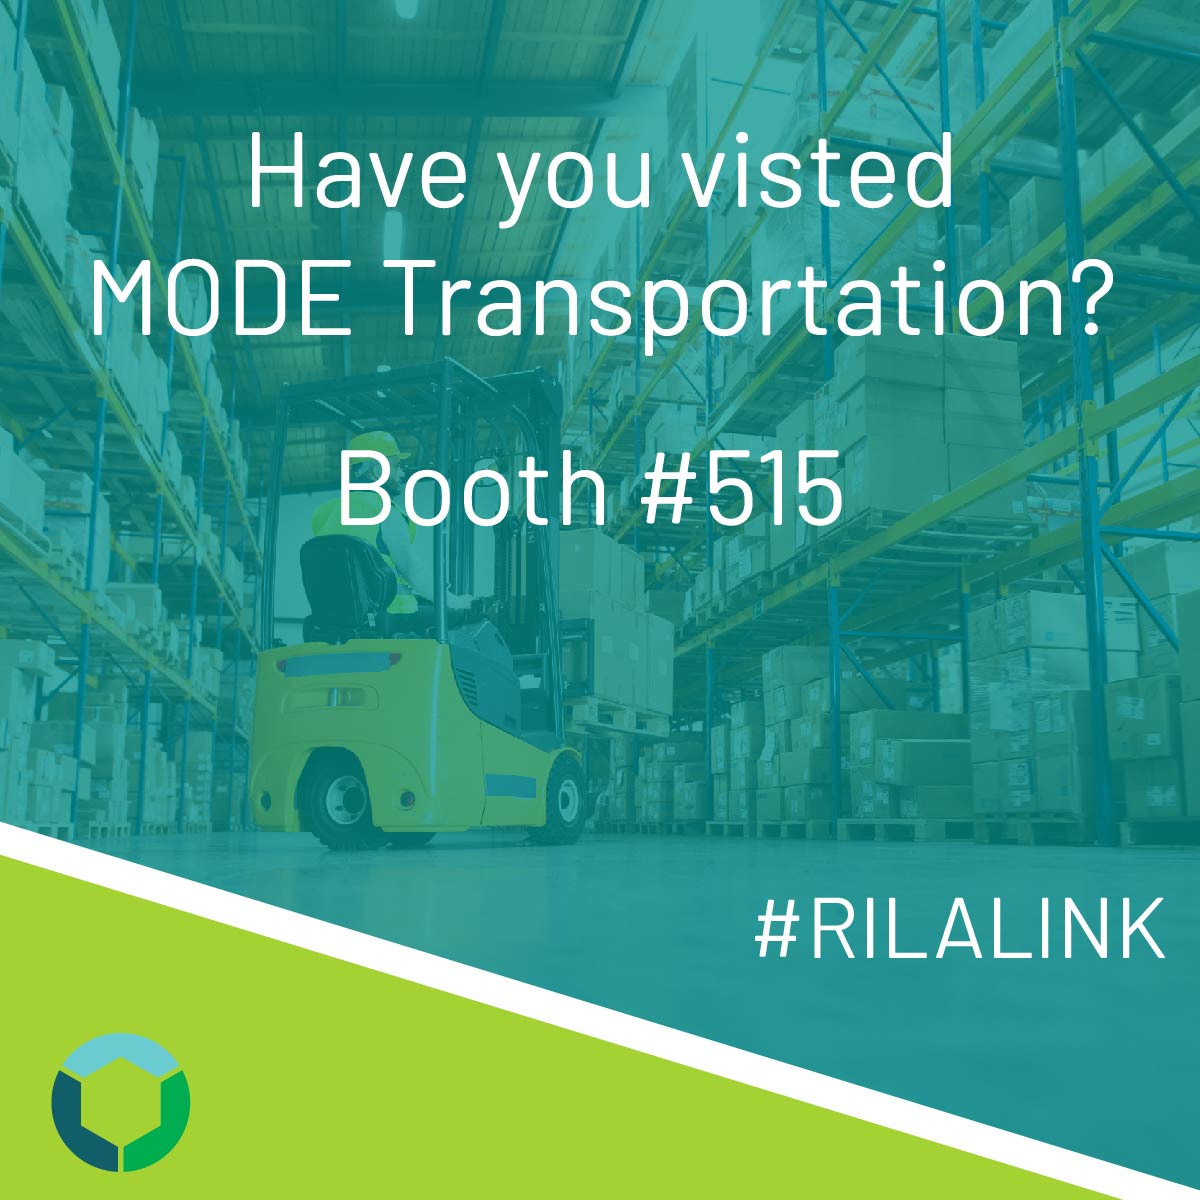 Today's the last day for LINK2020, be sure and visit us before you leave! #MODETrans #RILA2020 #RILALINK